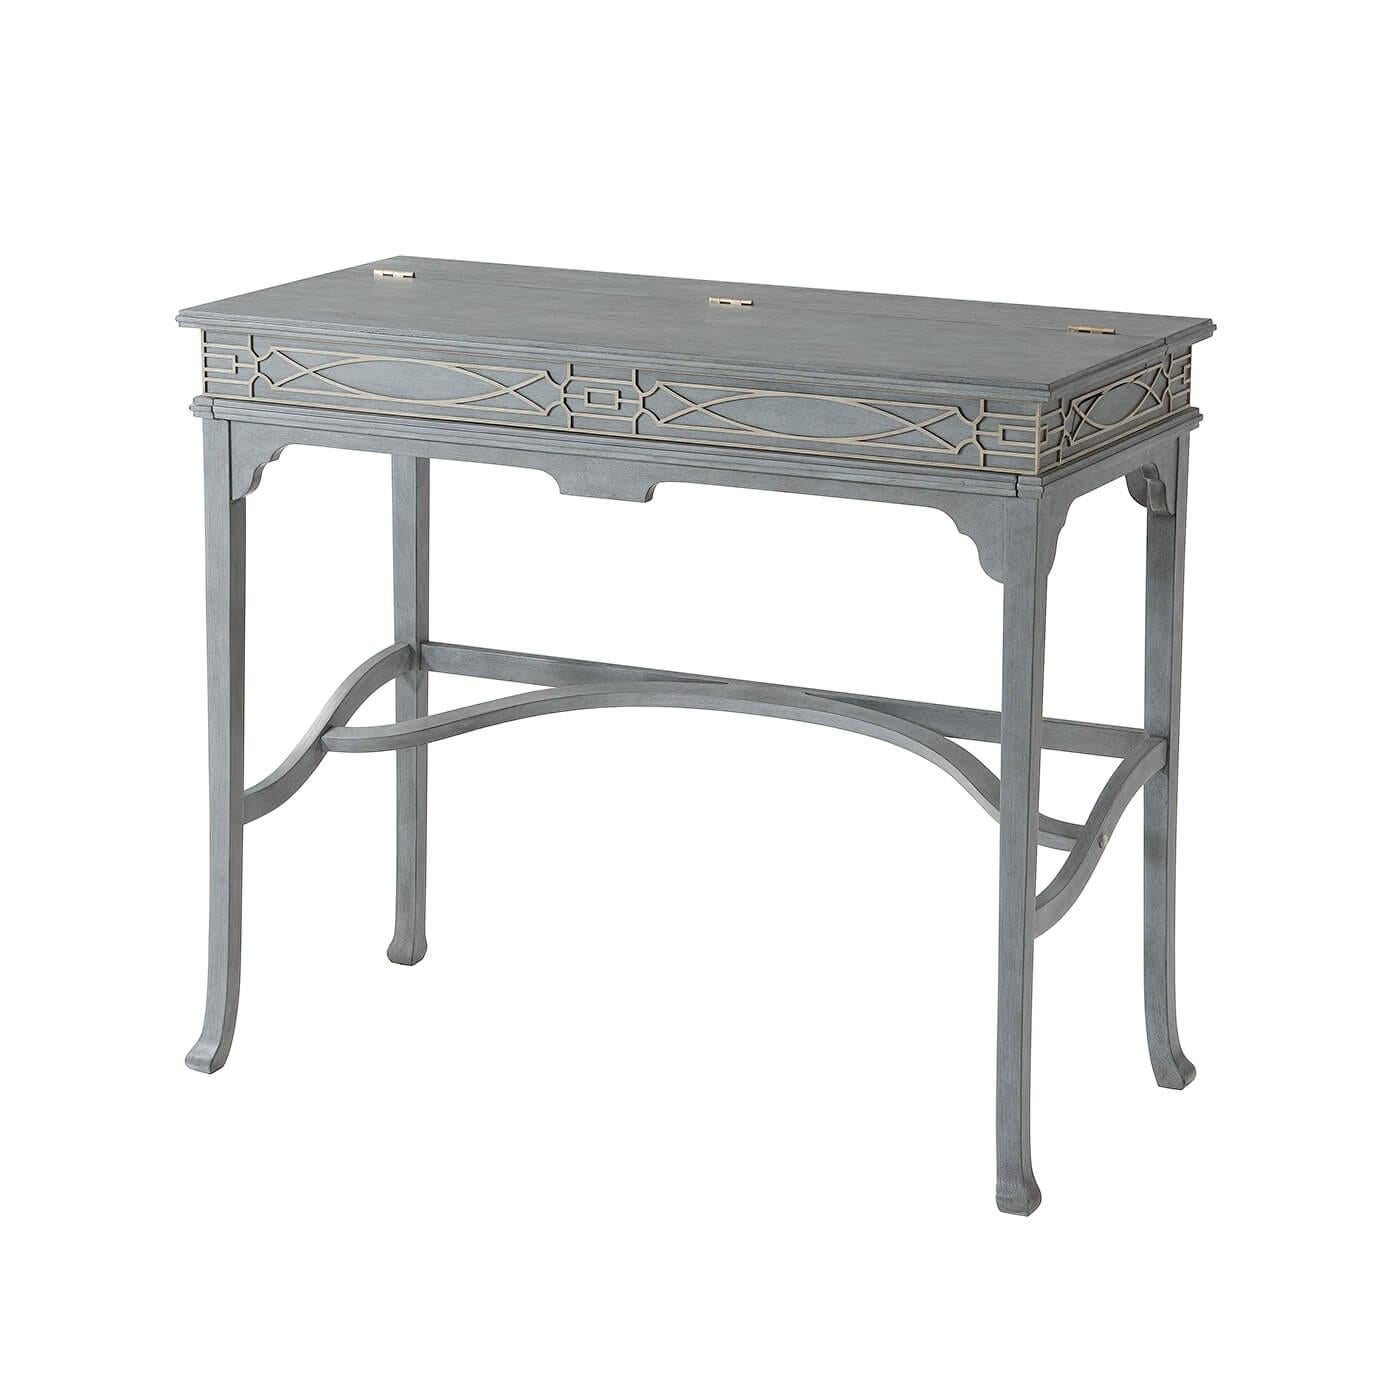 A vintage greyed limestone painted campaign desk, with a Chinese Chippendale blind fret decorated frieze, the hinged top opening to reveal a blue leather writing surface and pigeonholes, on splayed legs joined by stretchers.

Dimensions: 40